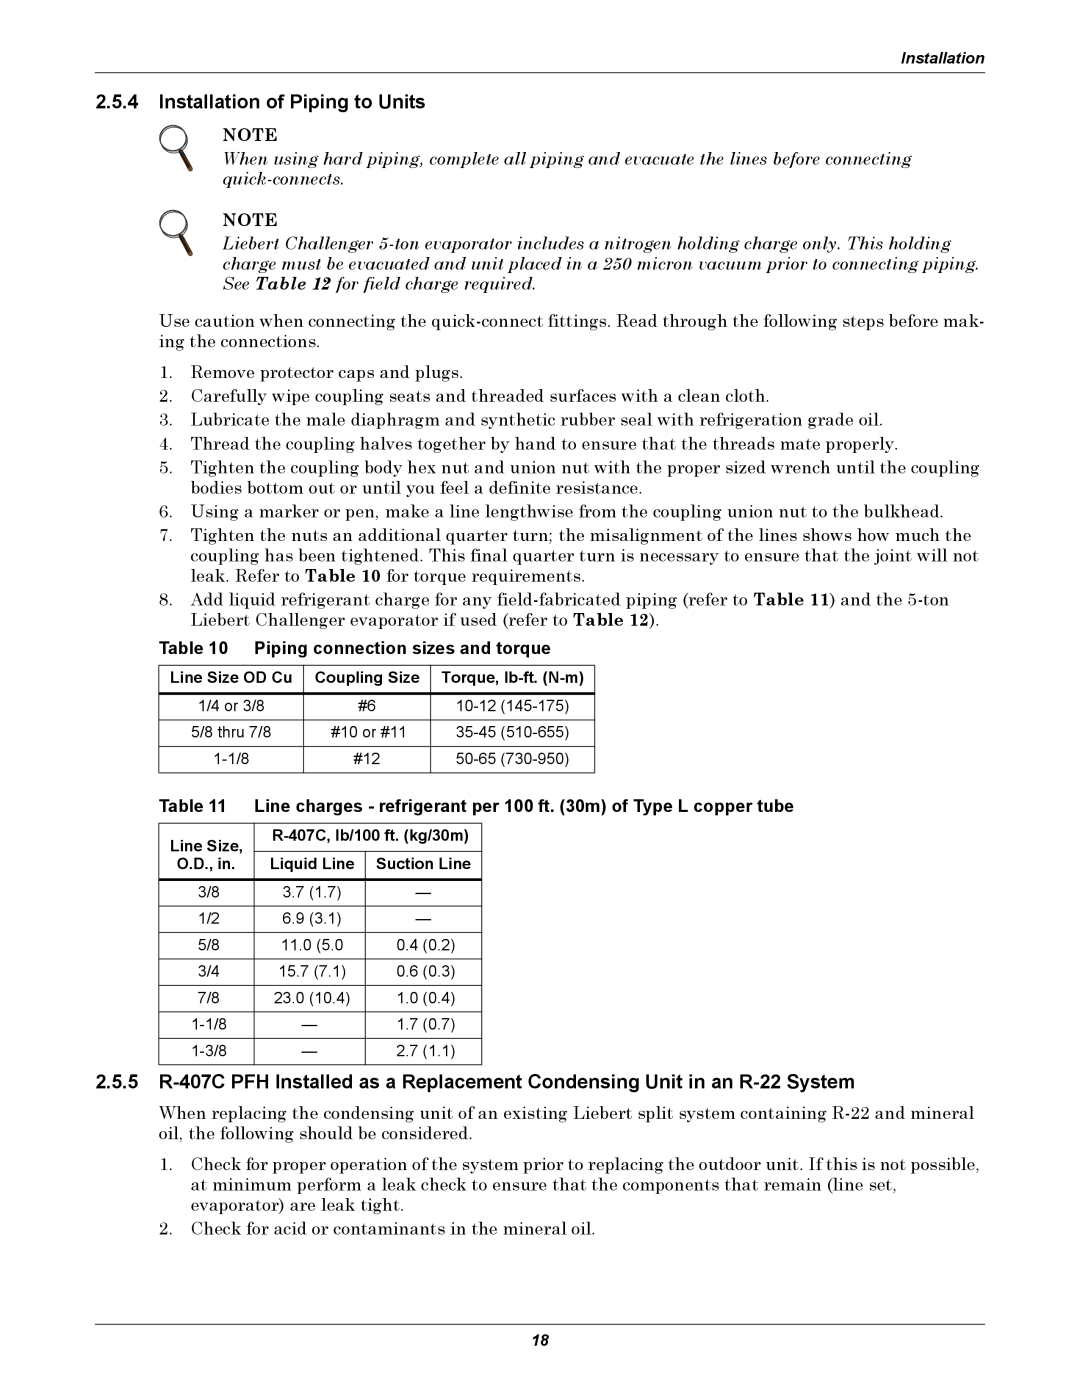 Emerson Figure i manual 2.5.4Installation of Piping to Units, Piping connection sizes and torque 